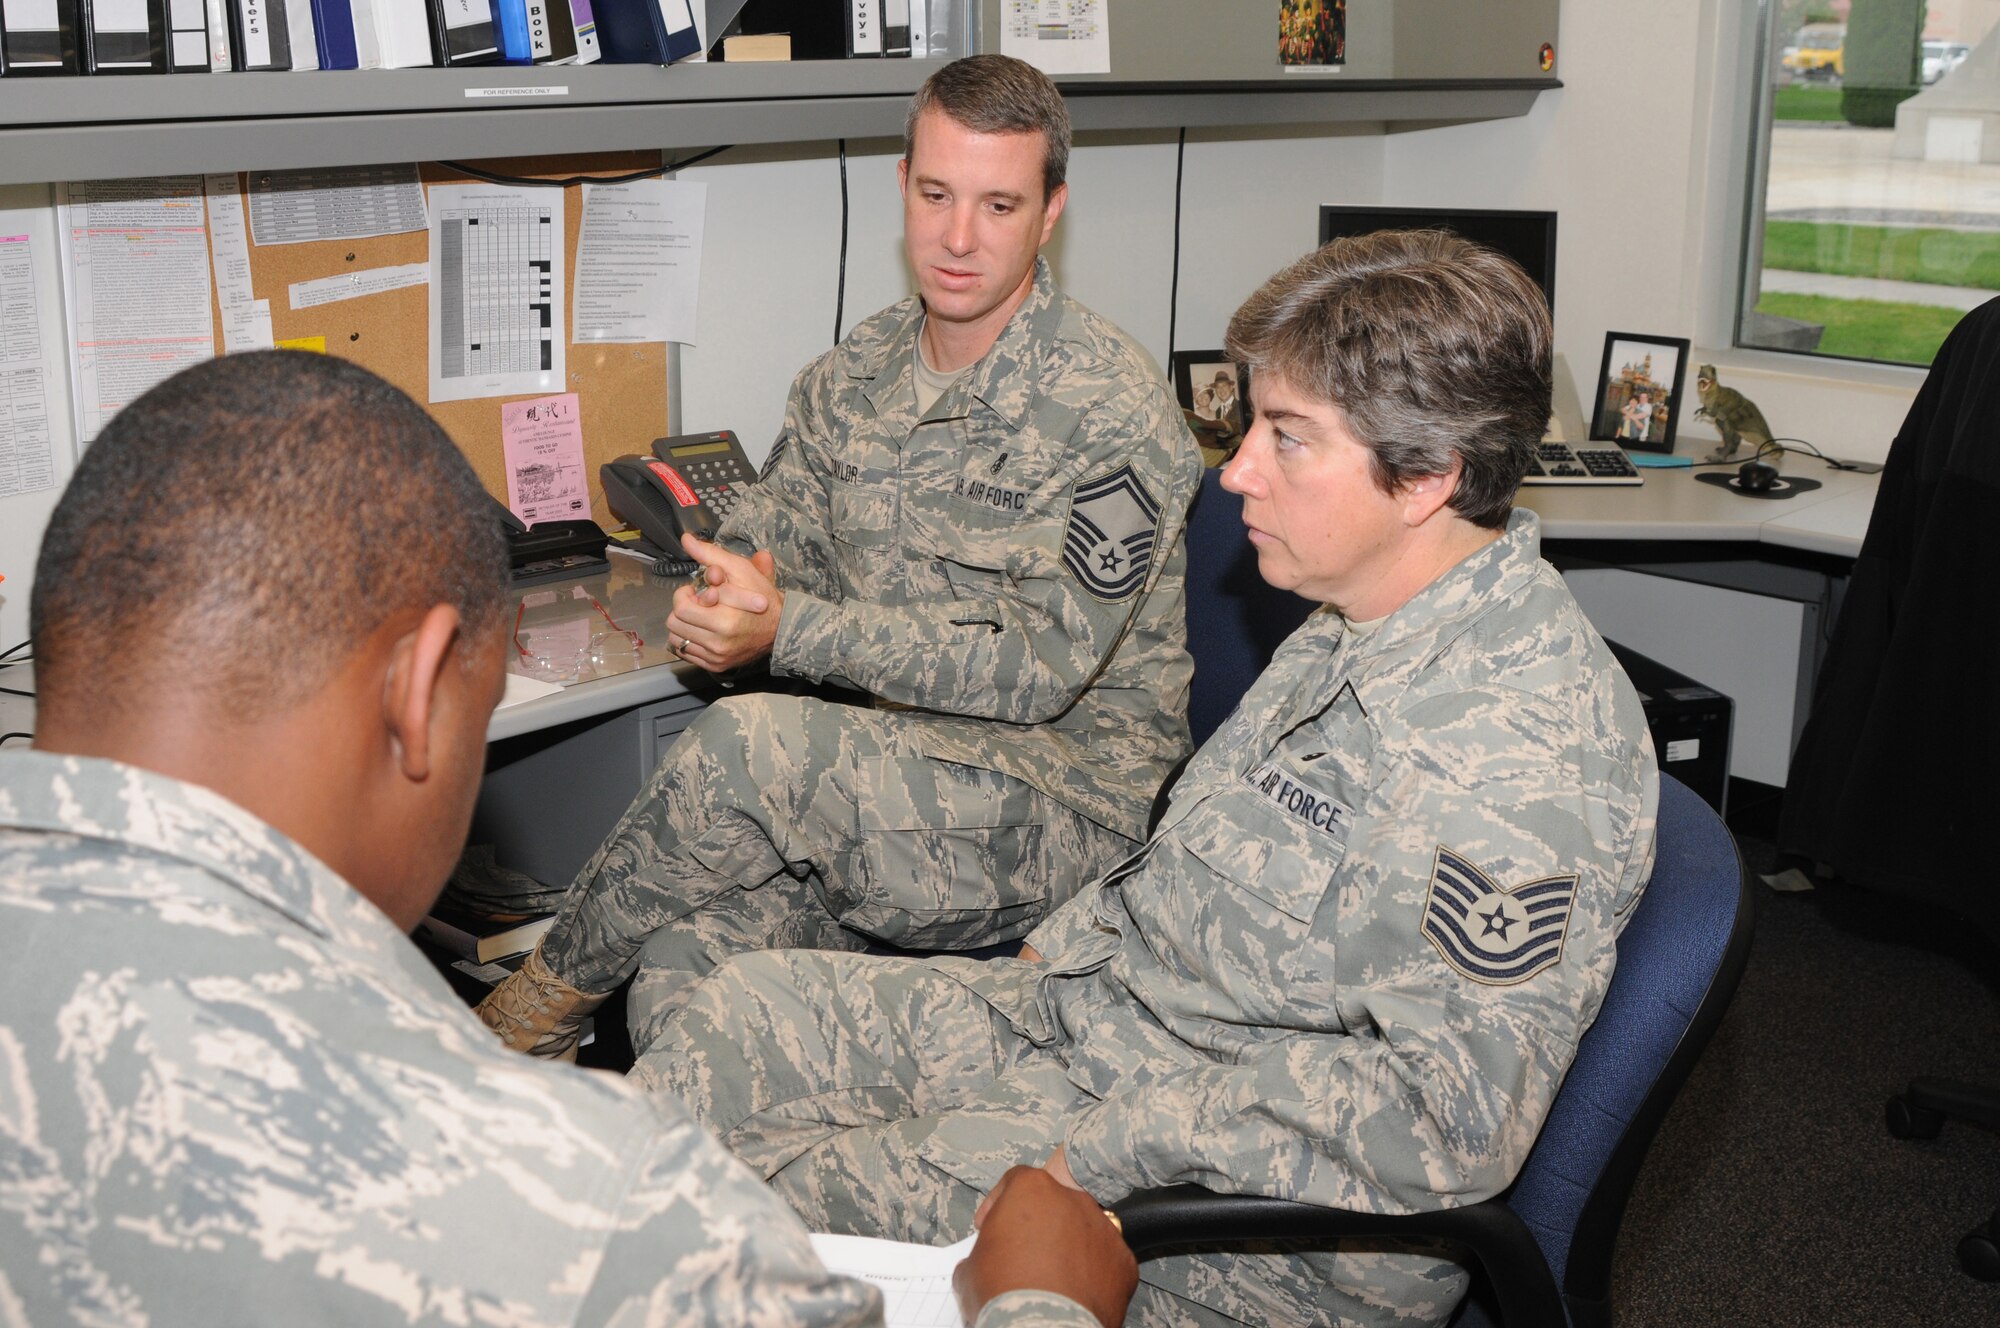 Senior Master Sergeant Jerod Taylor and Tech Sergeant Cody Yeager, airmen in the 173rd Medical Group, review inspection results with a member of the Unit Compliance Inspection team at Kingsley Field, Ore., September 18, 2010.  Kingsley Field has been under the microscope by the UCI team this week to ensure the base is performing up to Air Force standards.  (U.S. Air Force photo by Senior Airman Bryan Nealy.) Released